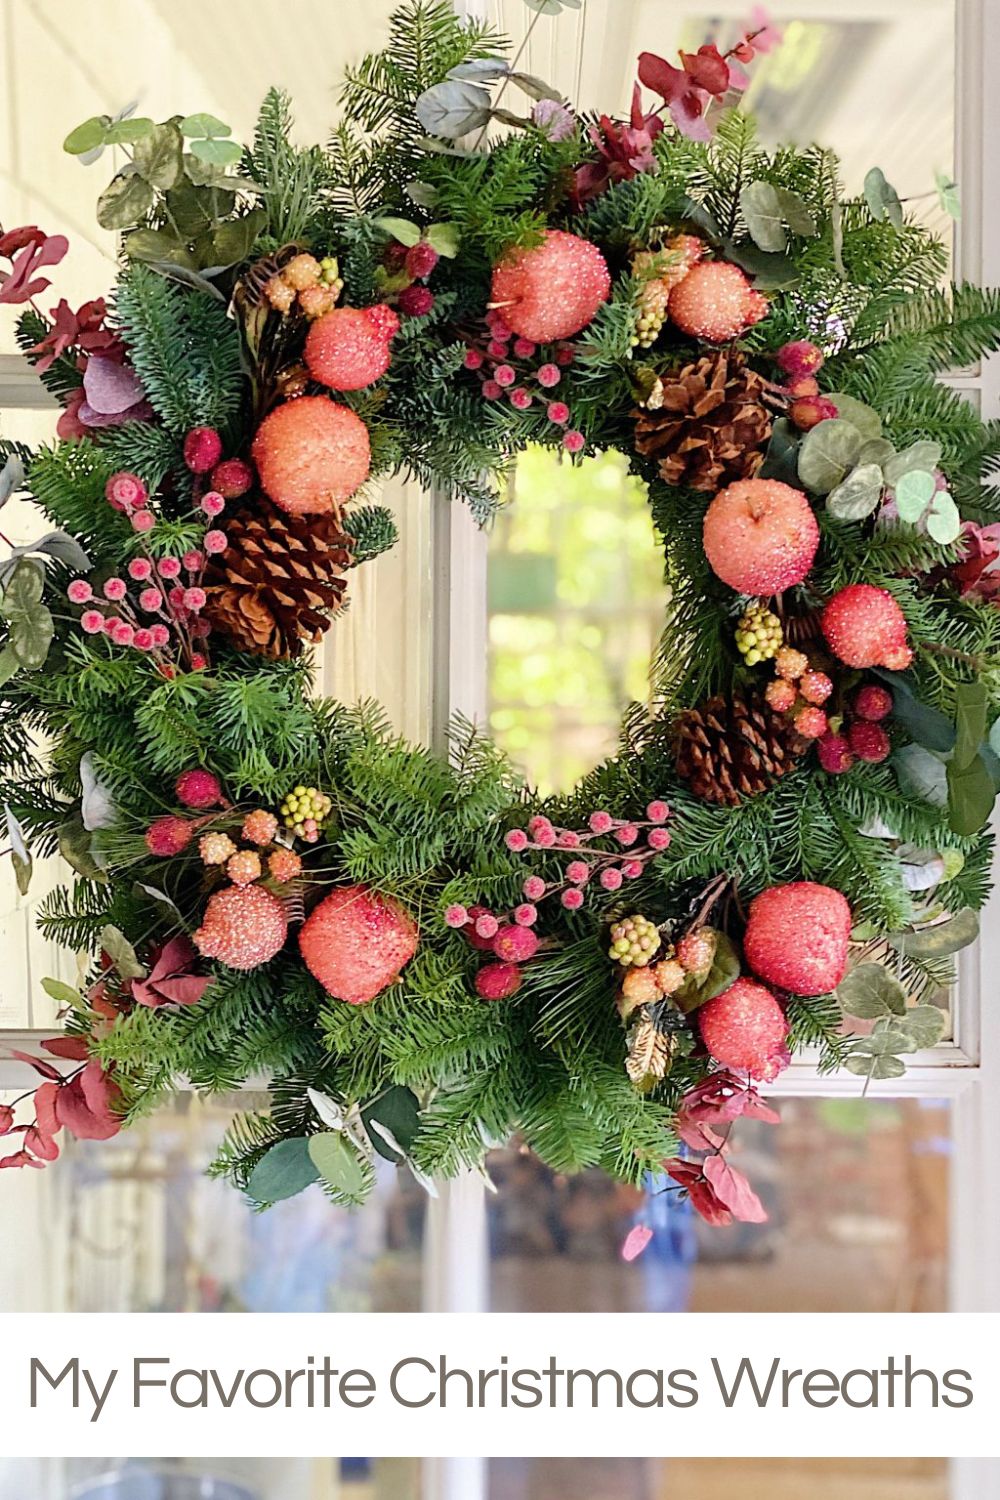 I am a huge fan of decorating with wreaths. I love so many different Christmas wreaths and today I am sharing my favorites.